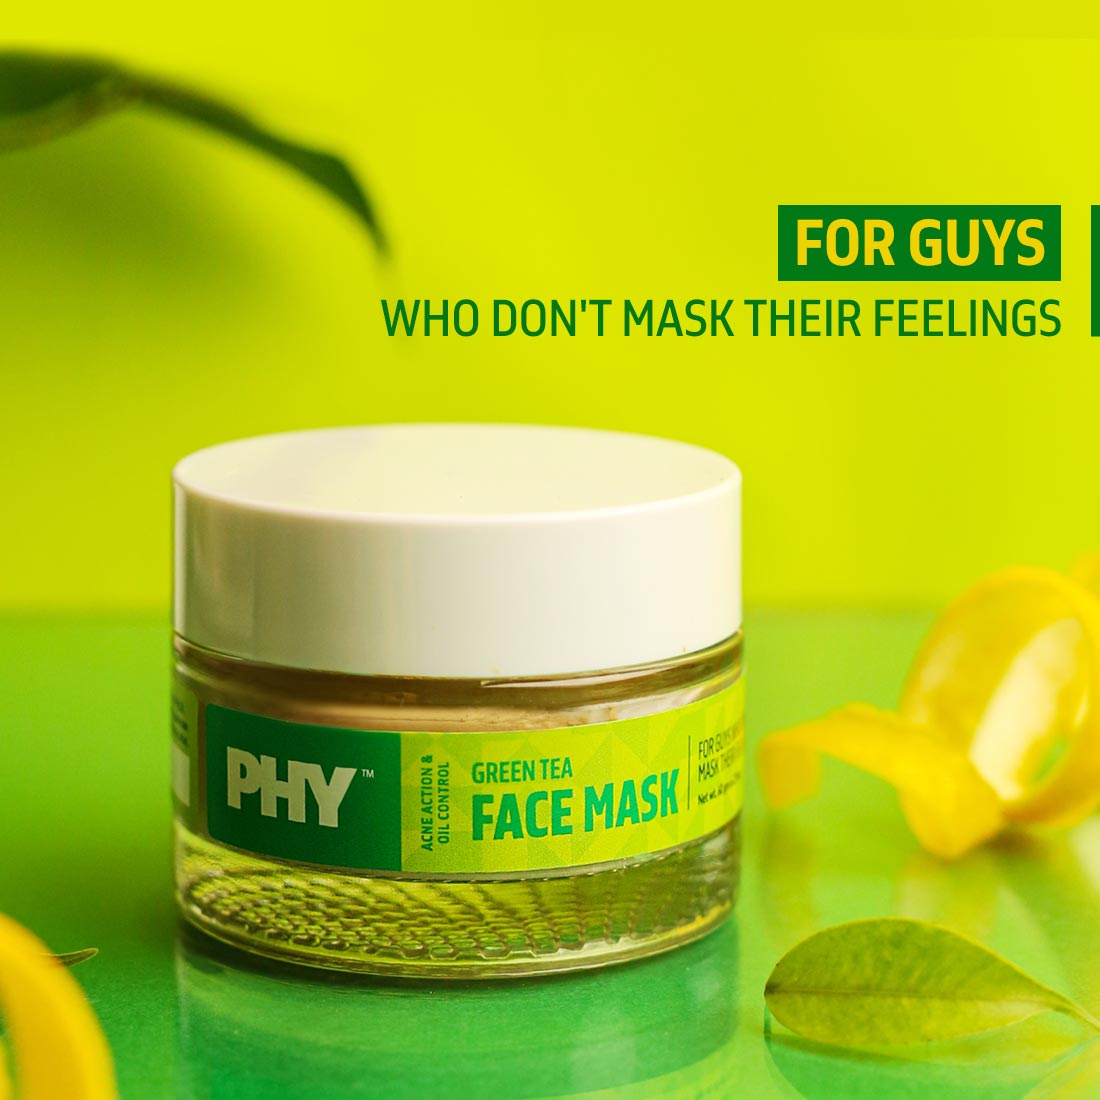 Phy Green Tea Face Mask